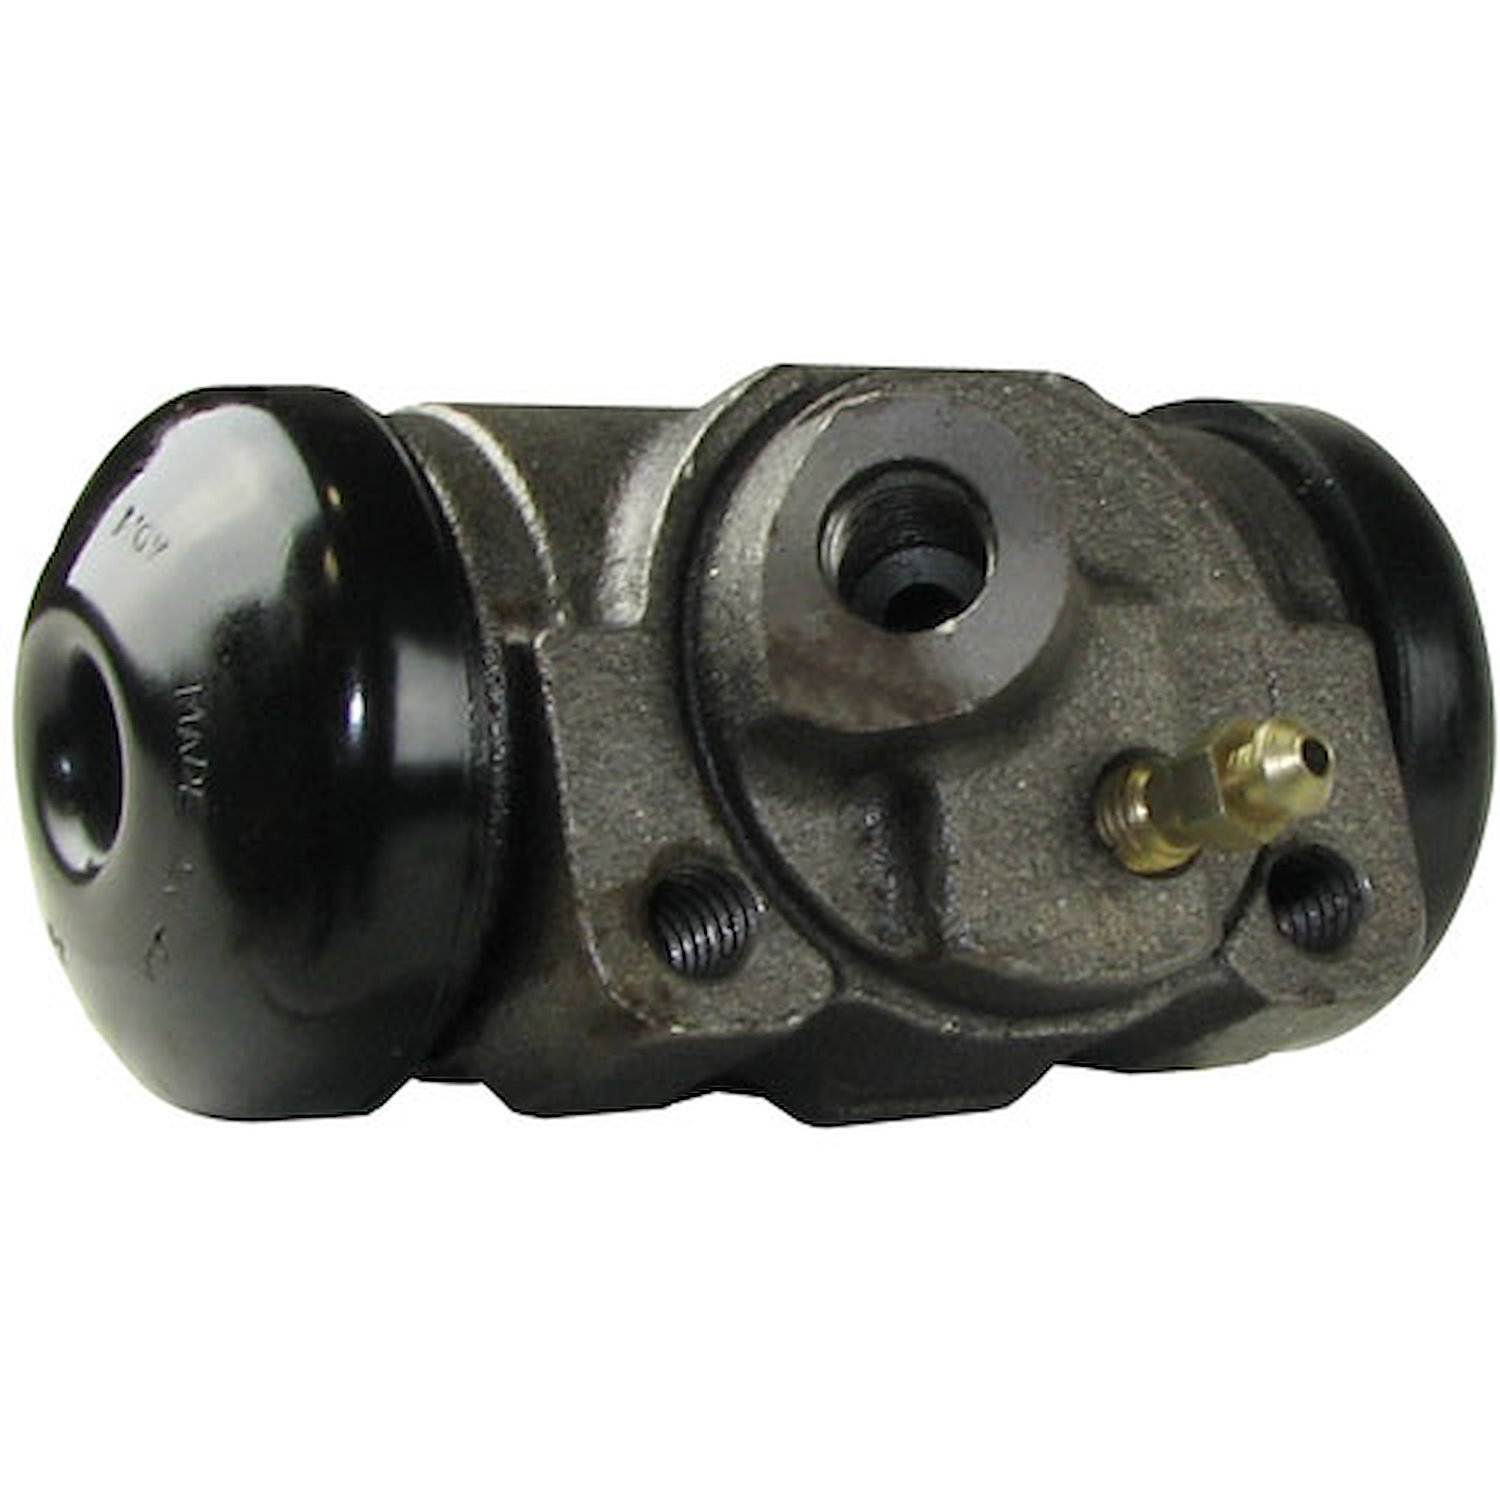 64 -73 Right 1 1/8 Bore 8 Cyl - Front Wheel Cylinder